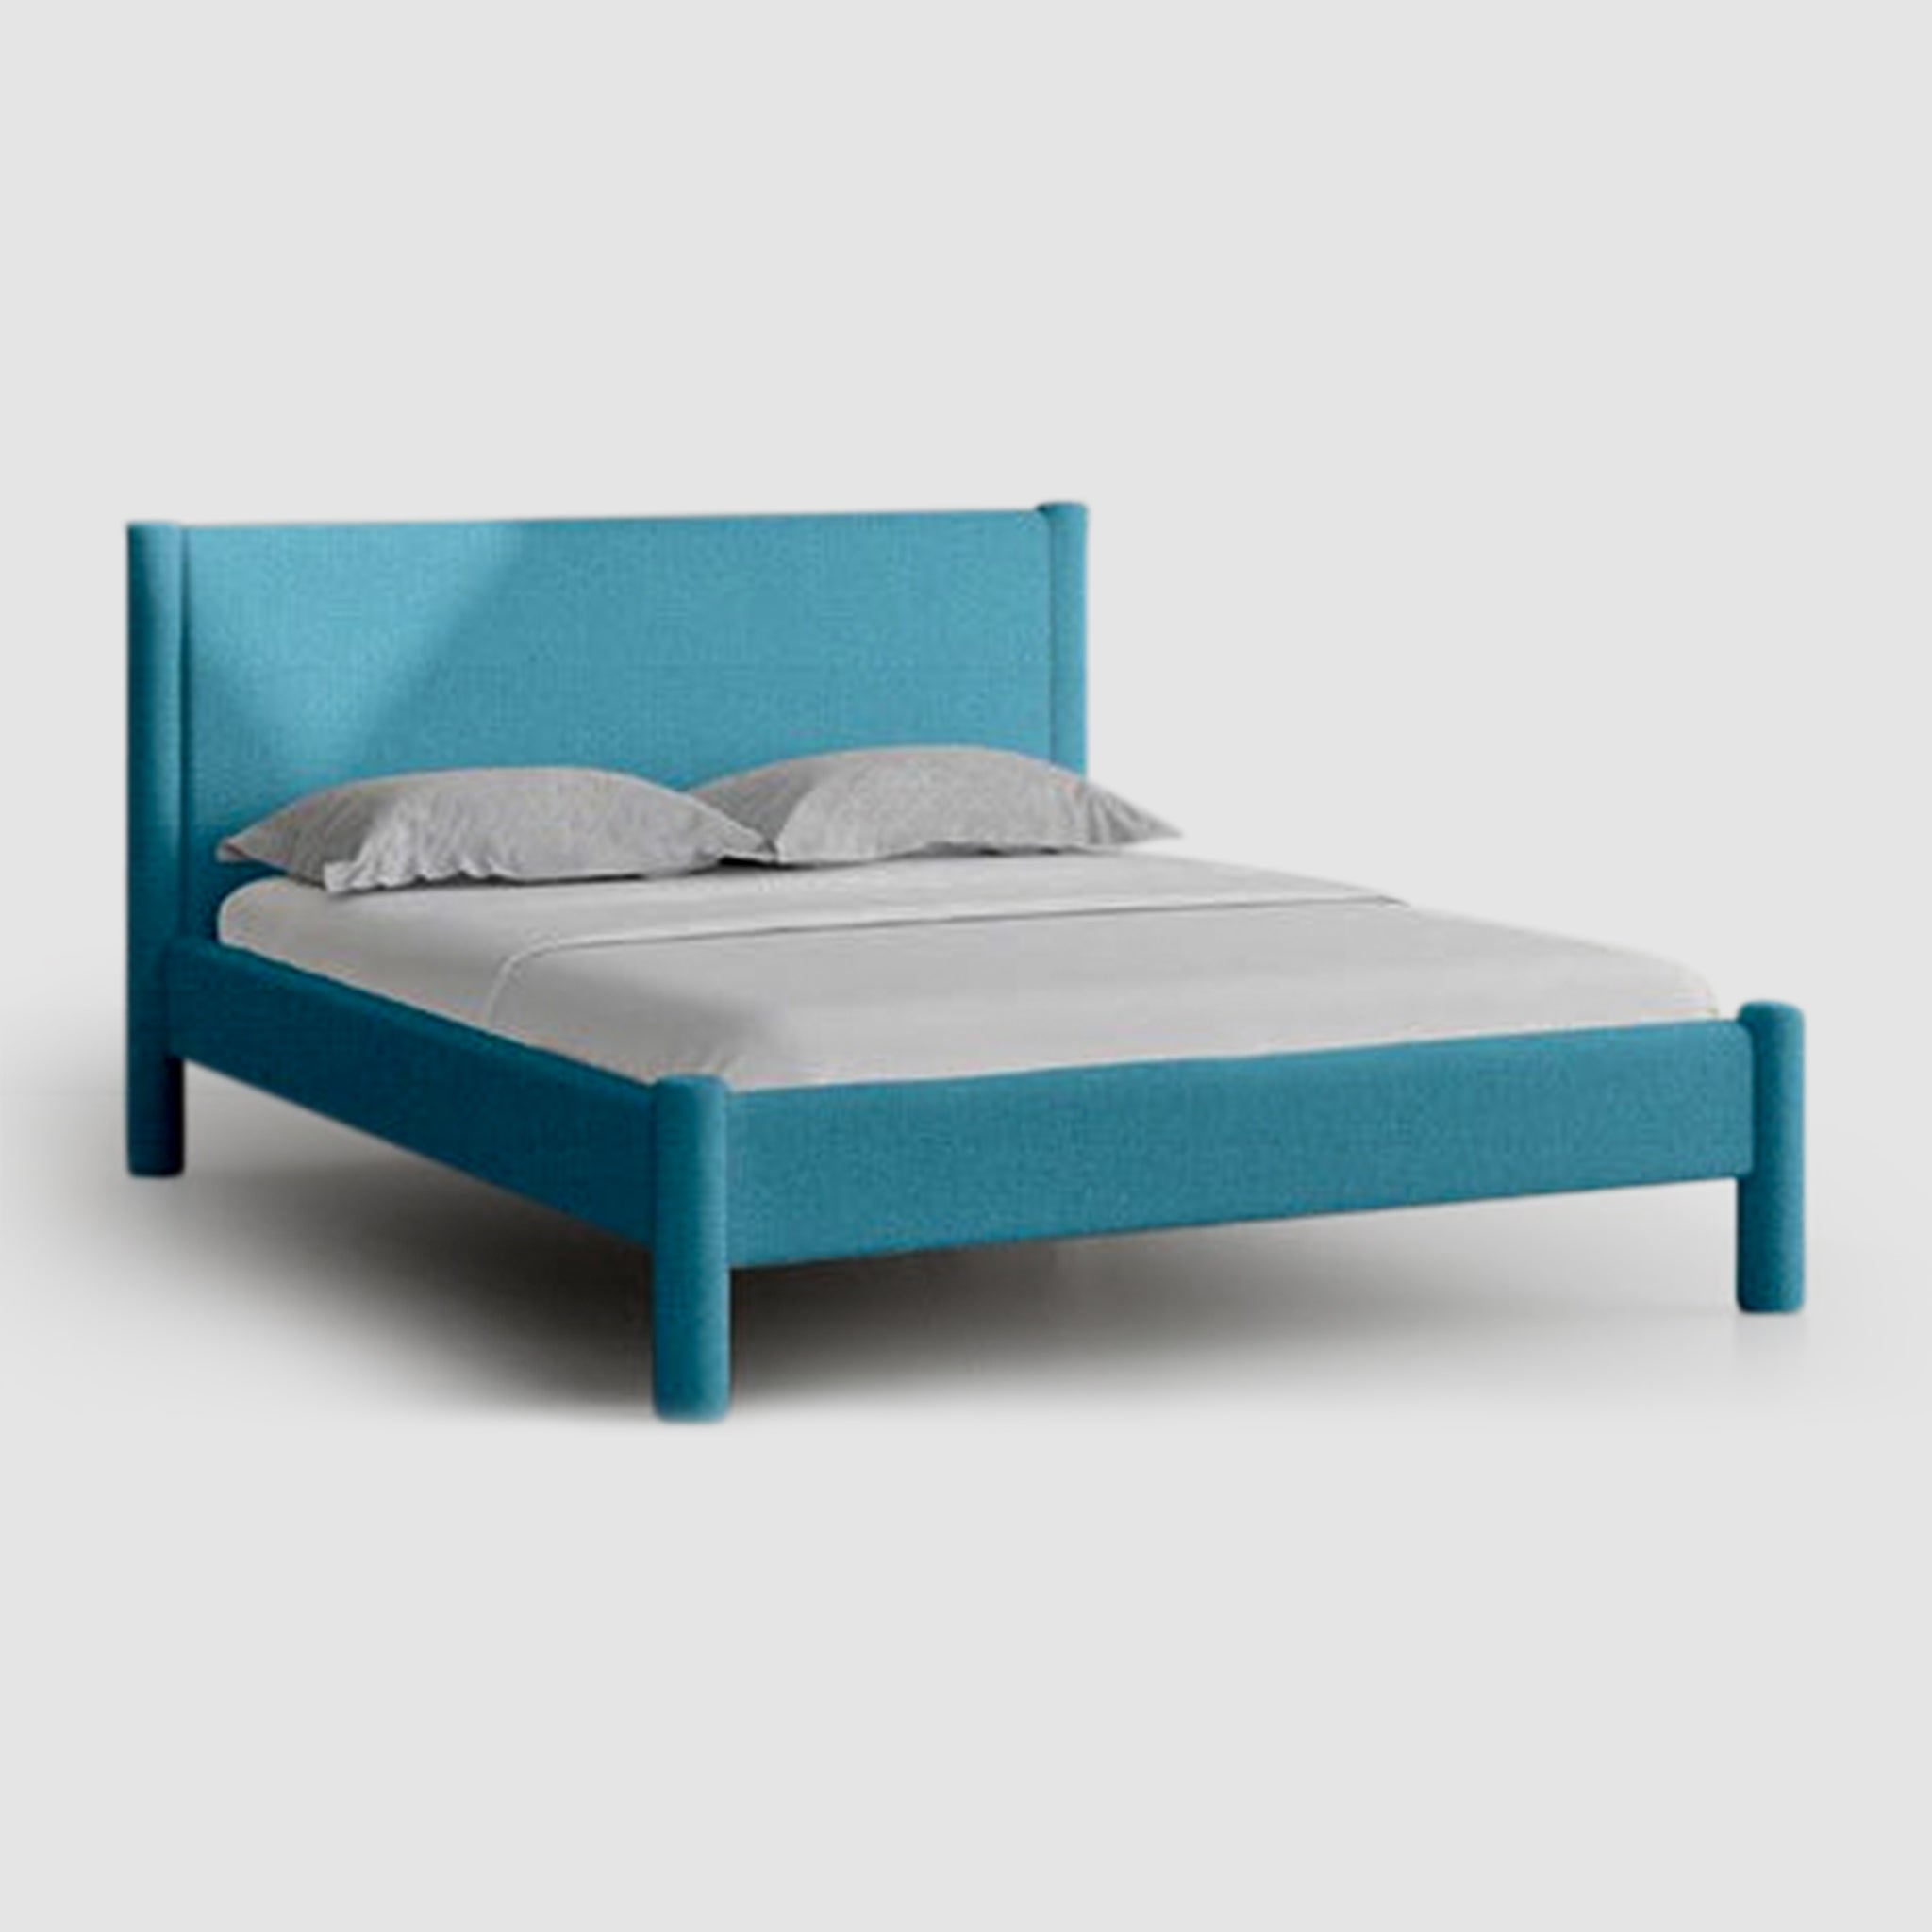 Stylish Carrie Bed in bright blue, perfect for contemporary bedroom settings.